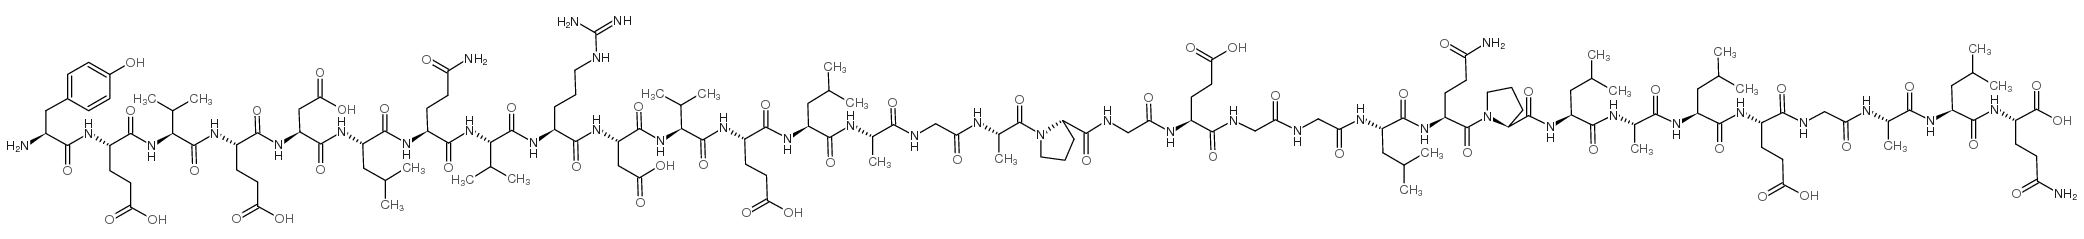 (Tyr0)-C-Peptide (dog) picture